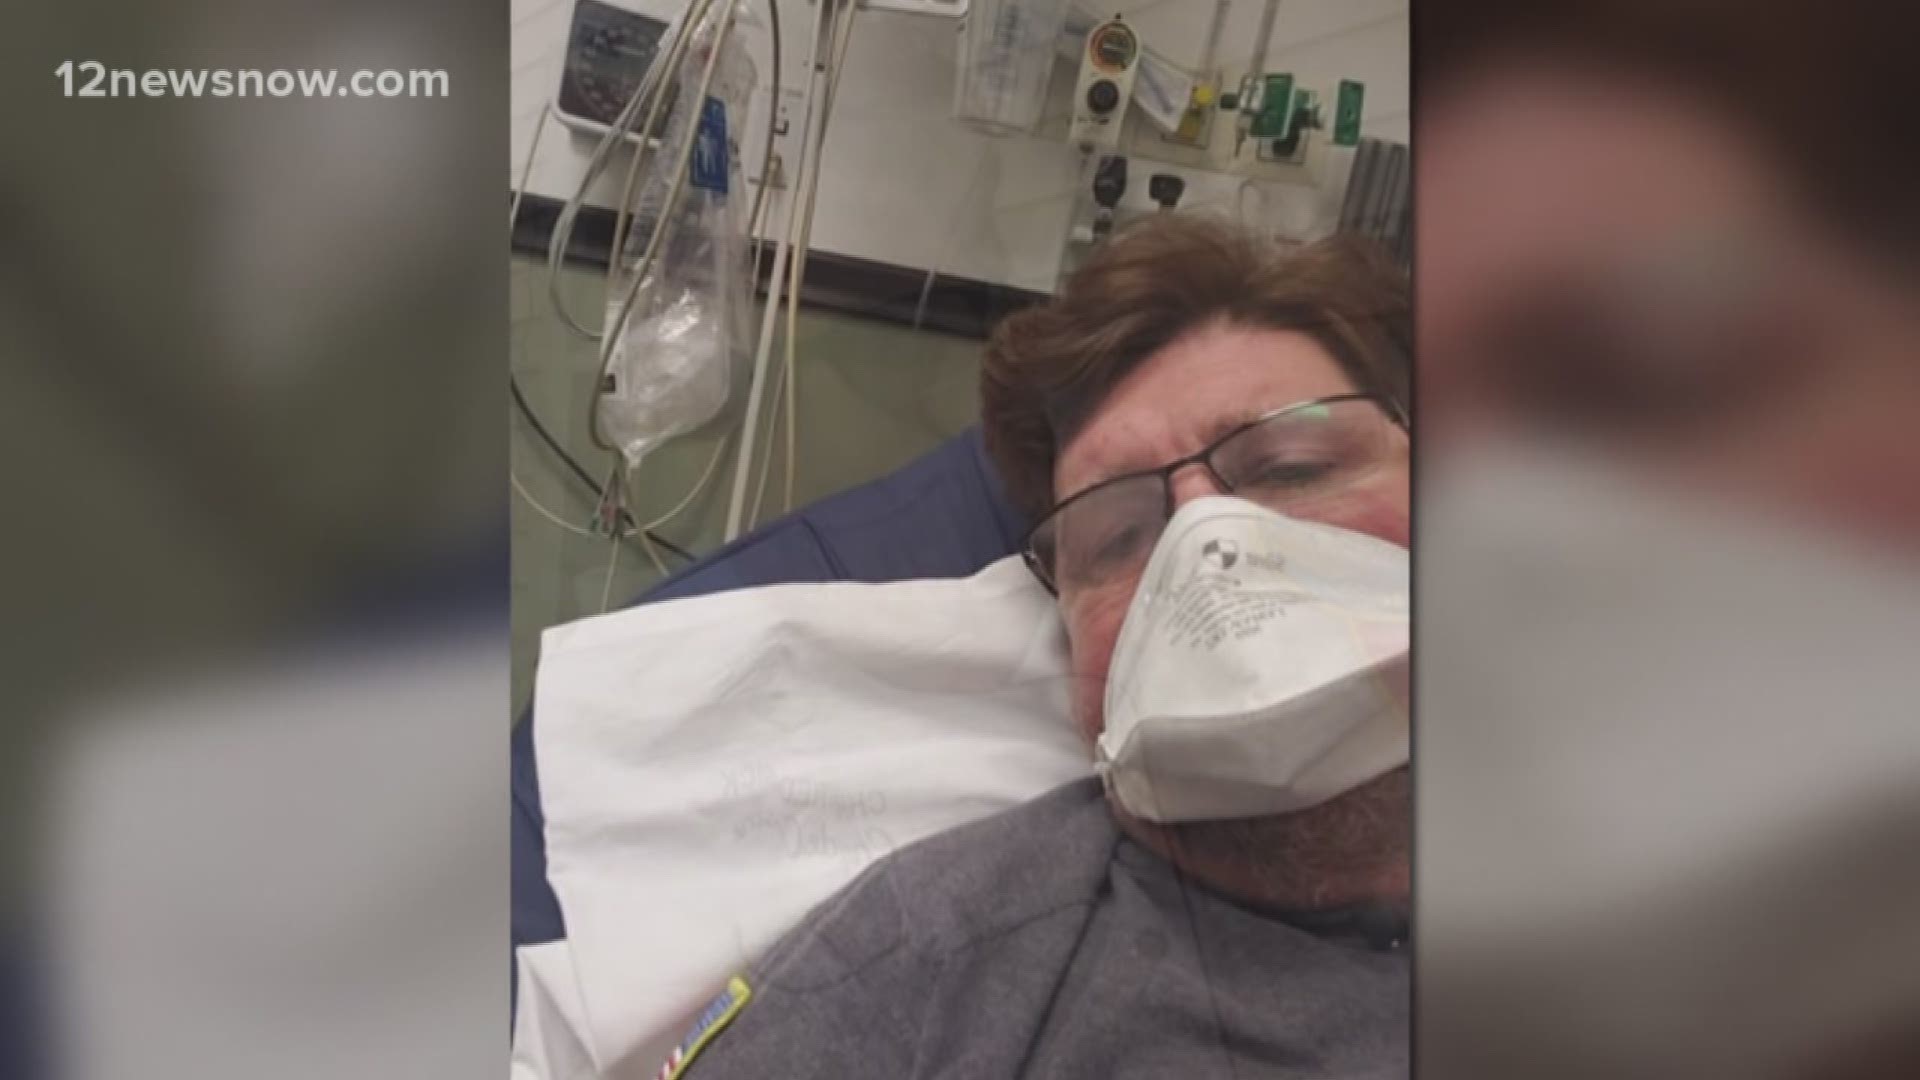 Chris Fredrick, 50, who tested positive for COVID-19 in Louisiana while working, became Hardin County’s first resident confirmed to have the virus on March 21, 2020.